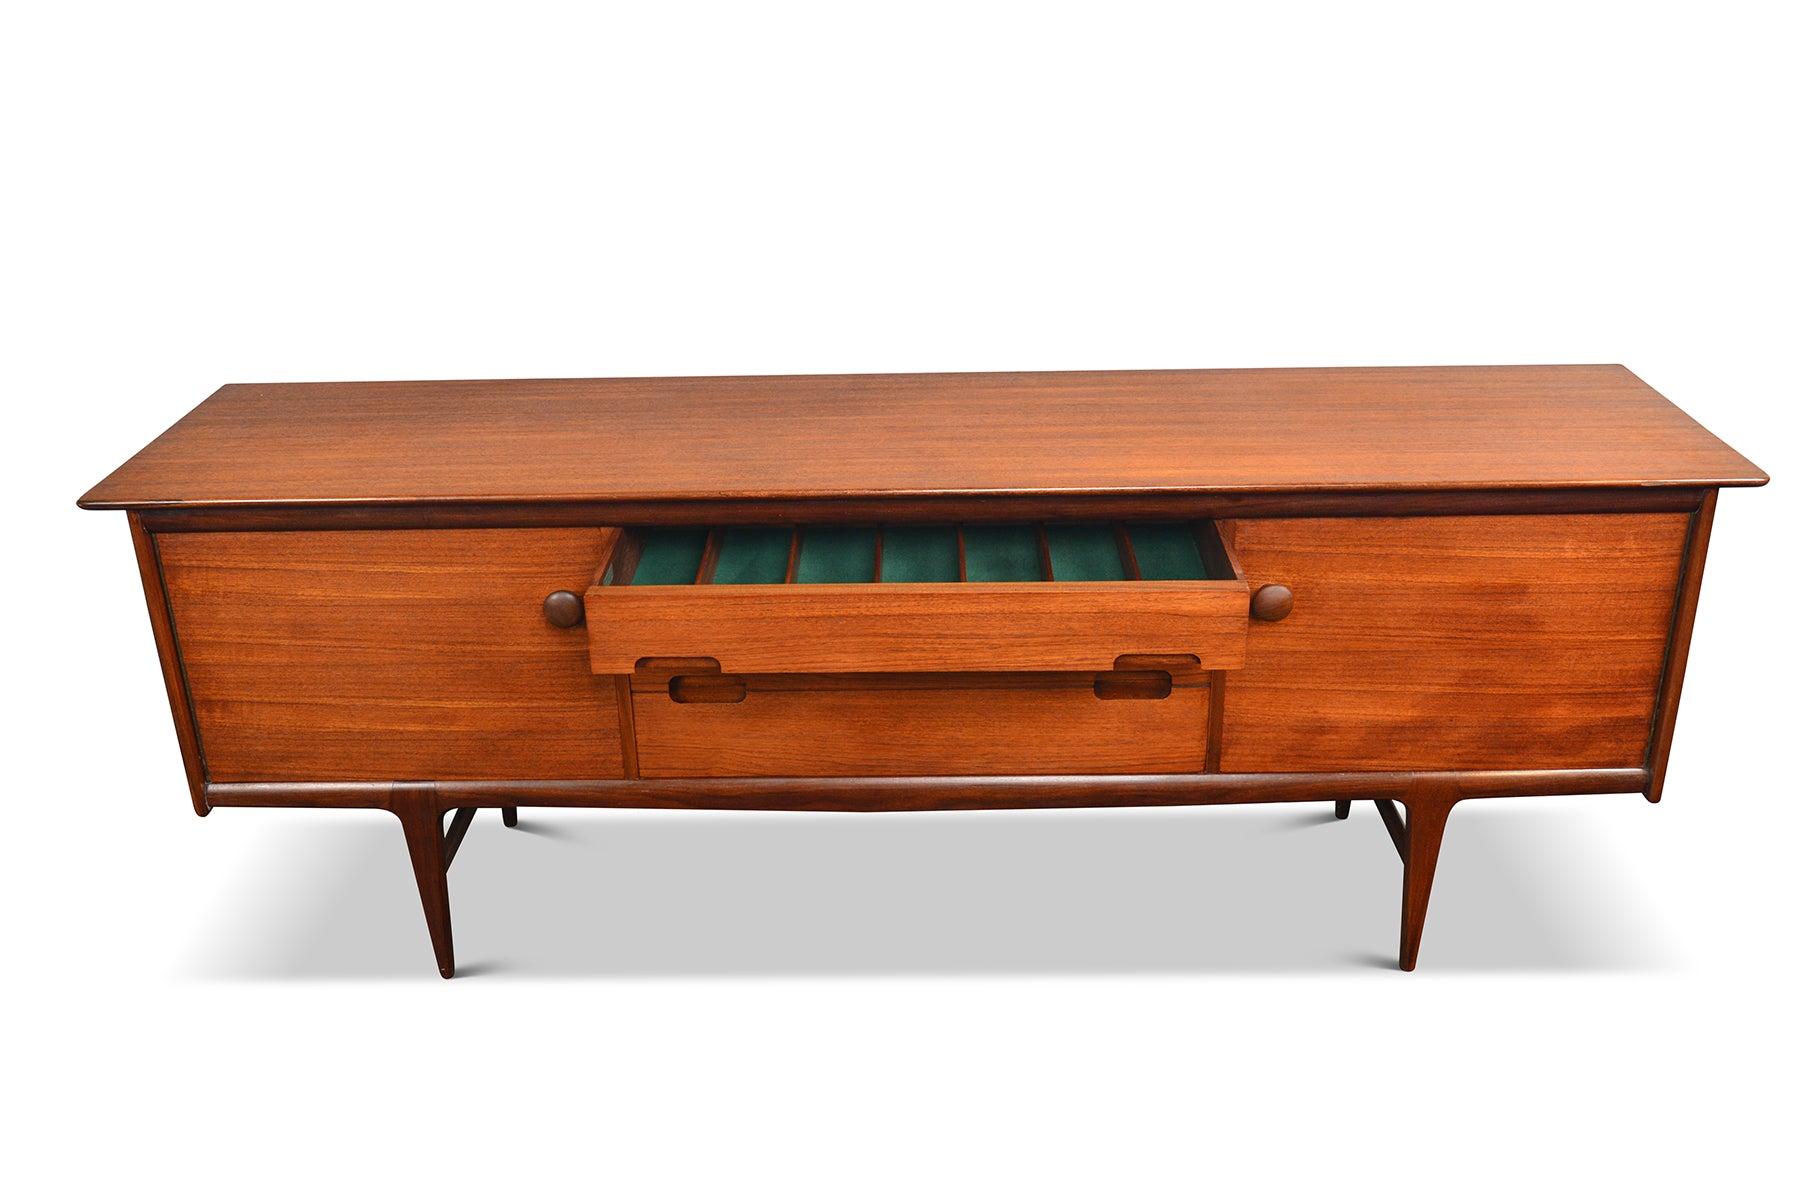 Large Teak Credenza by a. Younger Ltd #2 2